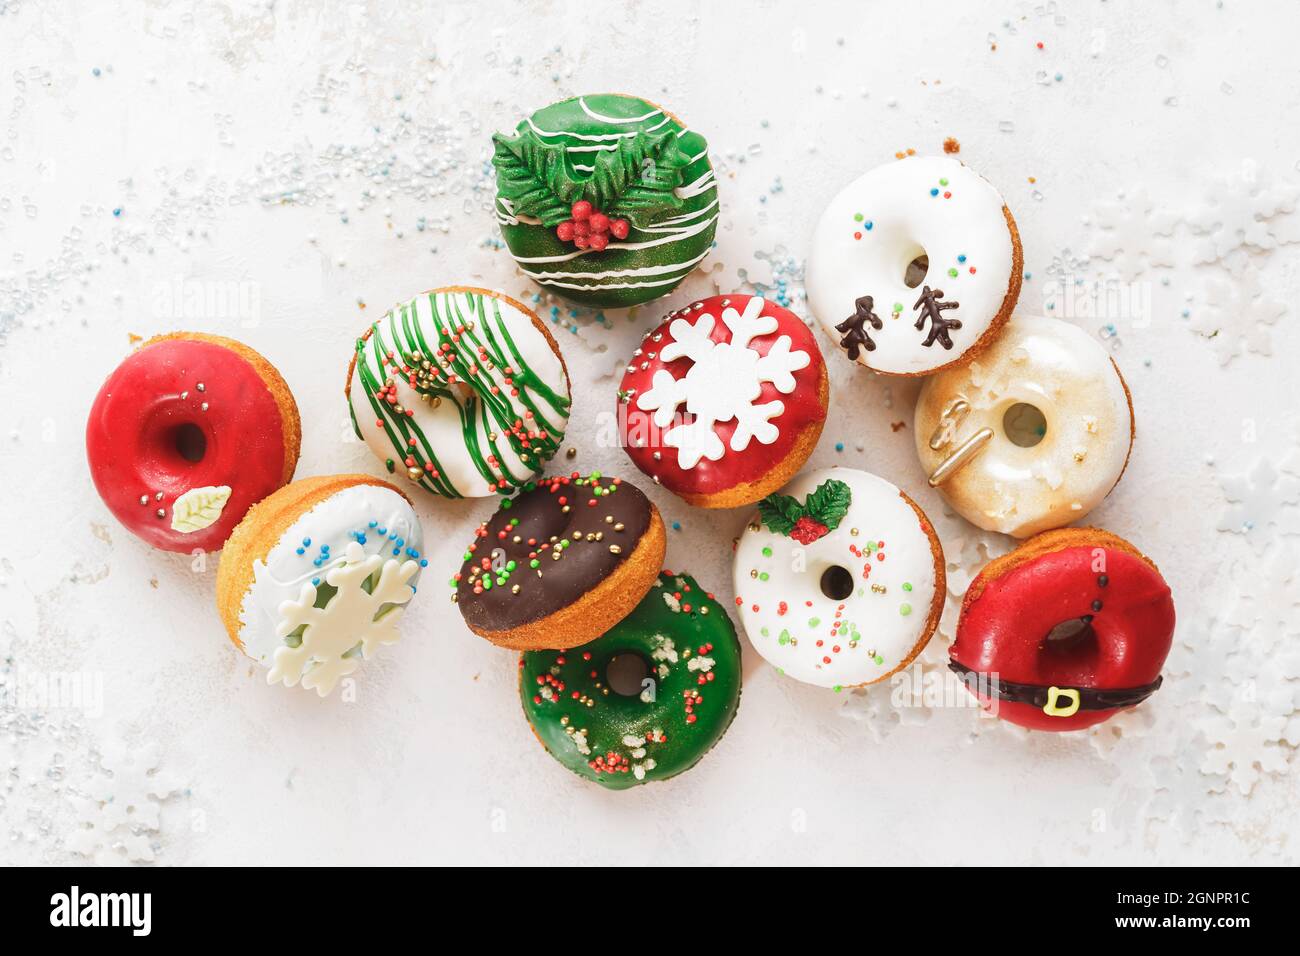 Homemade Glazed Christmas Donuts. Assorted homemade glazed donuts with sprinkles on white festive background. Top view, blank space Stock Photo